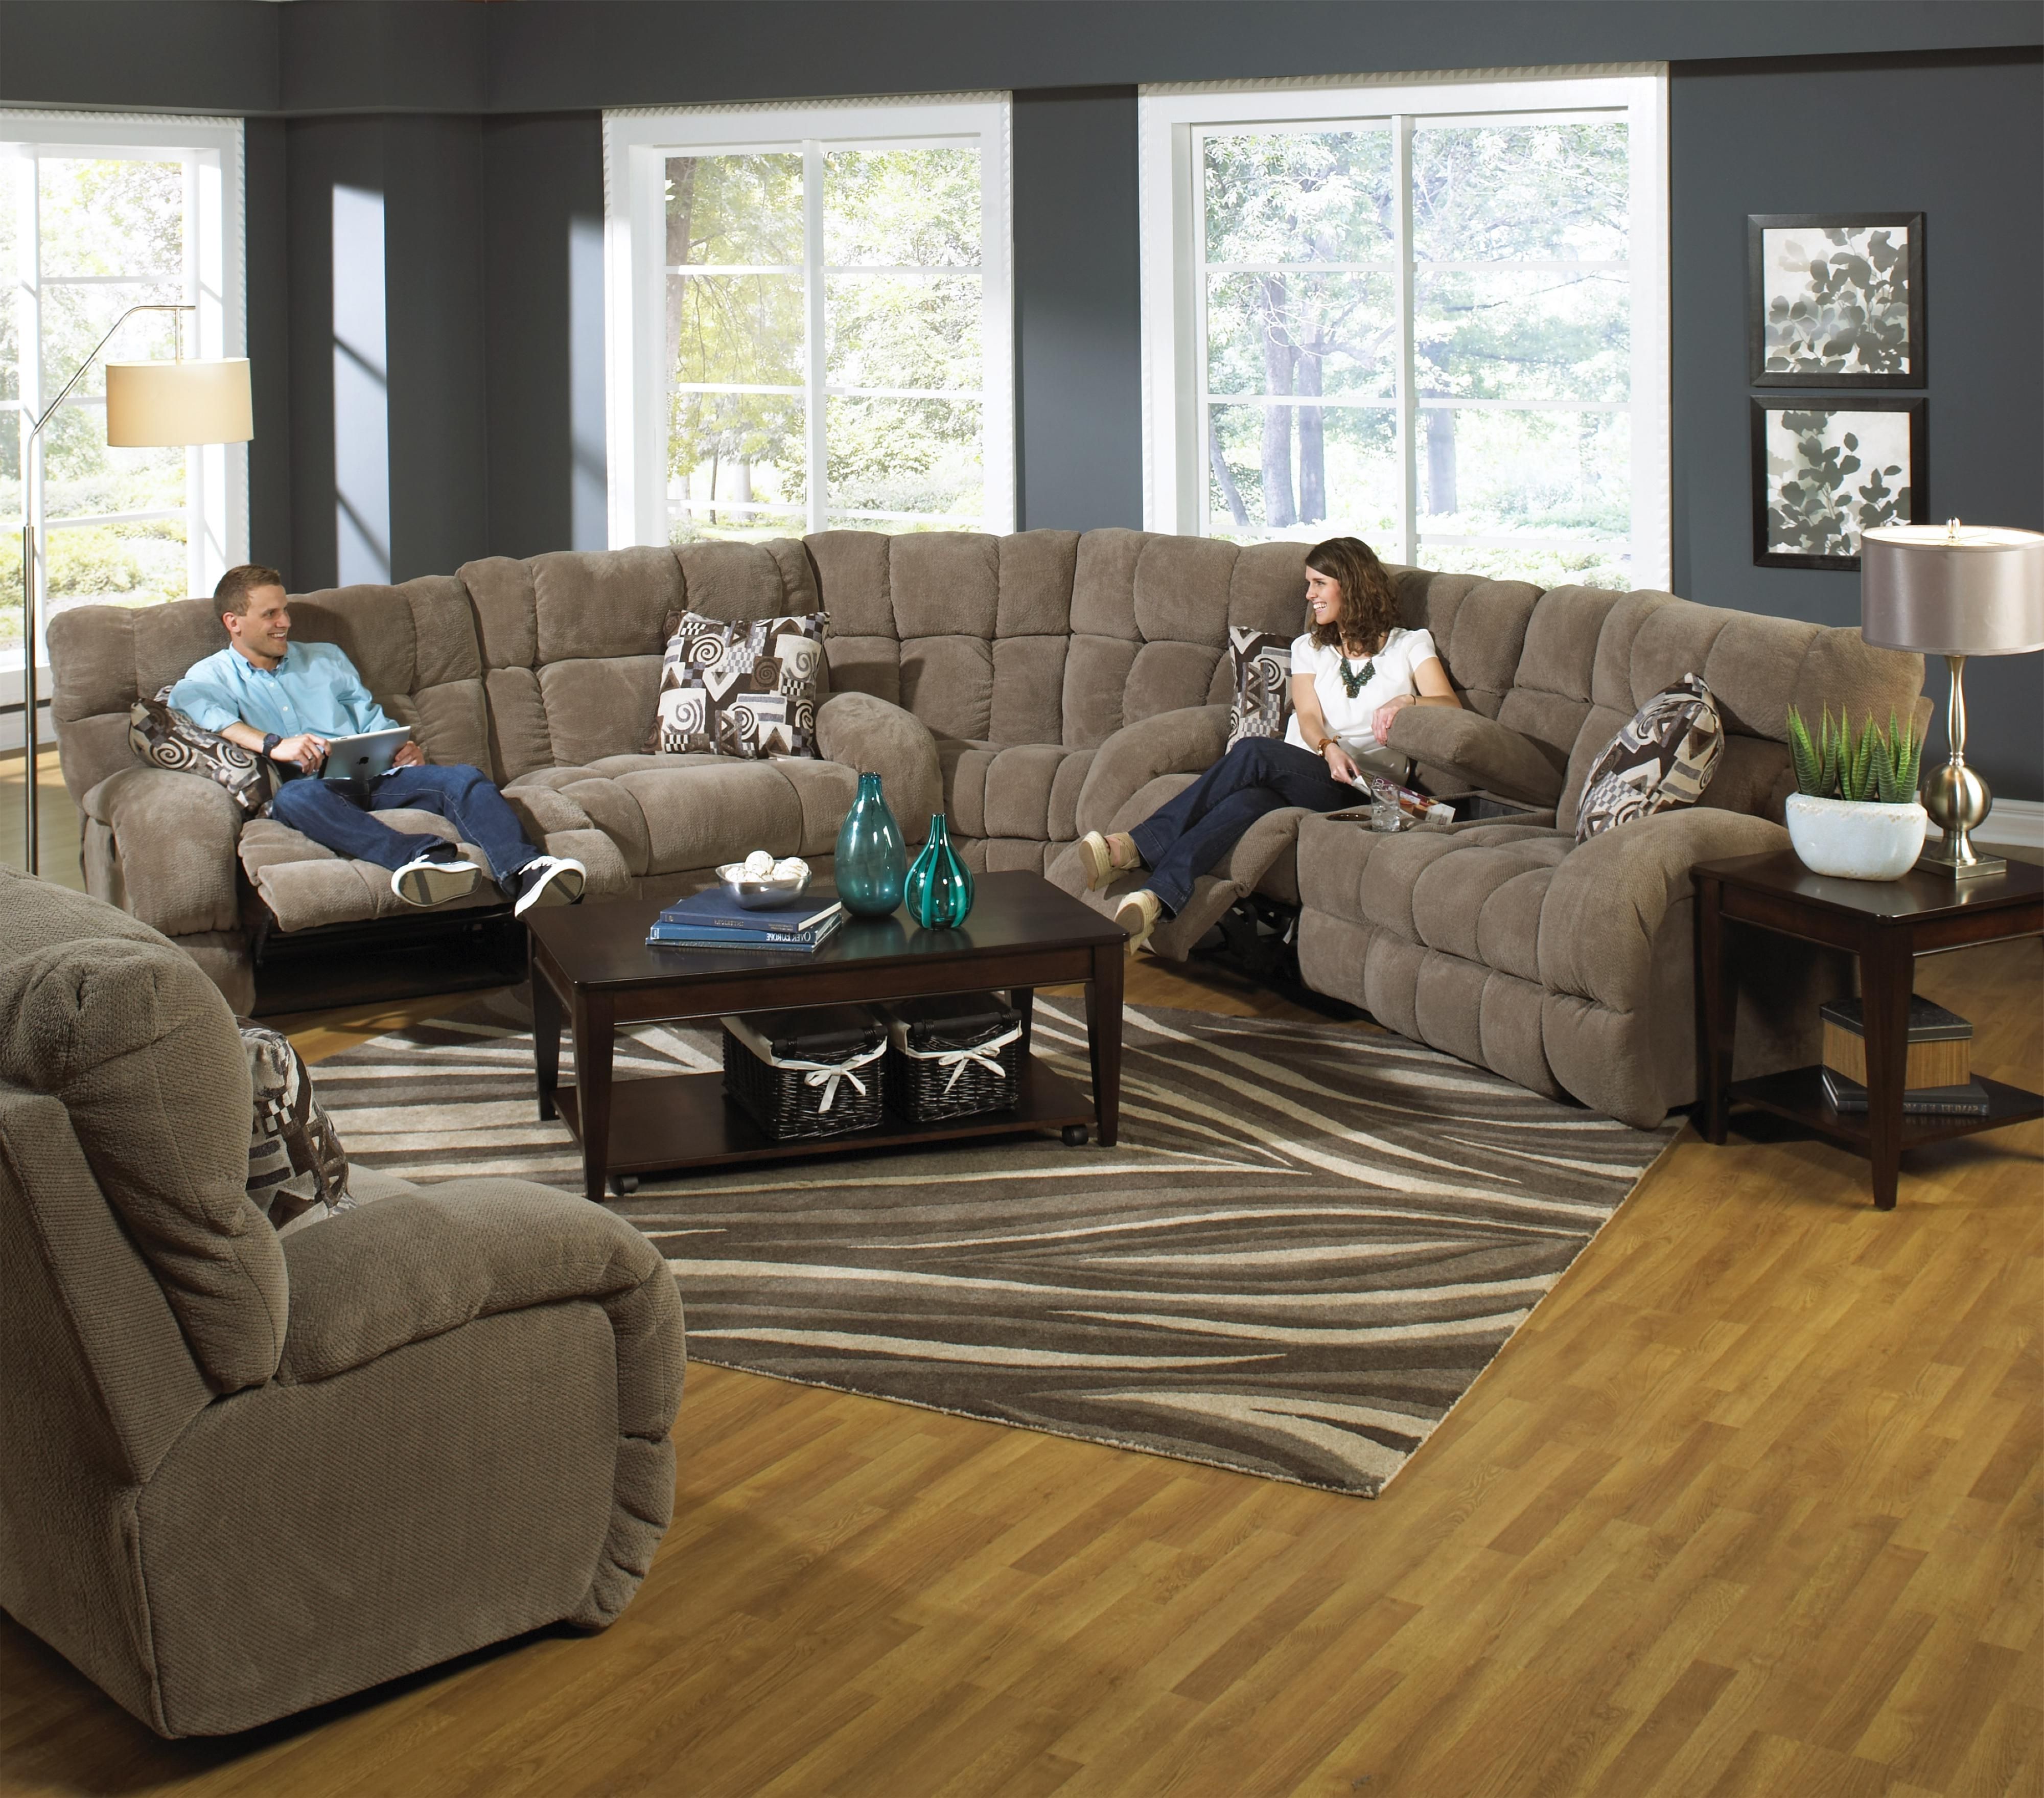 Luxury L Shaped Sectional Sofa With Recliner 58 For Macys Regarding 2018 Reclining U Shaped Sectionals (View 13 of 20)